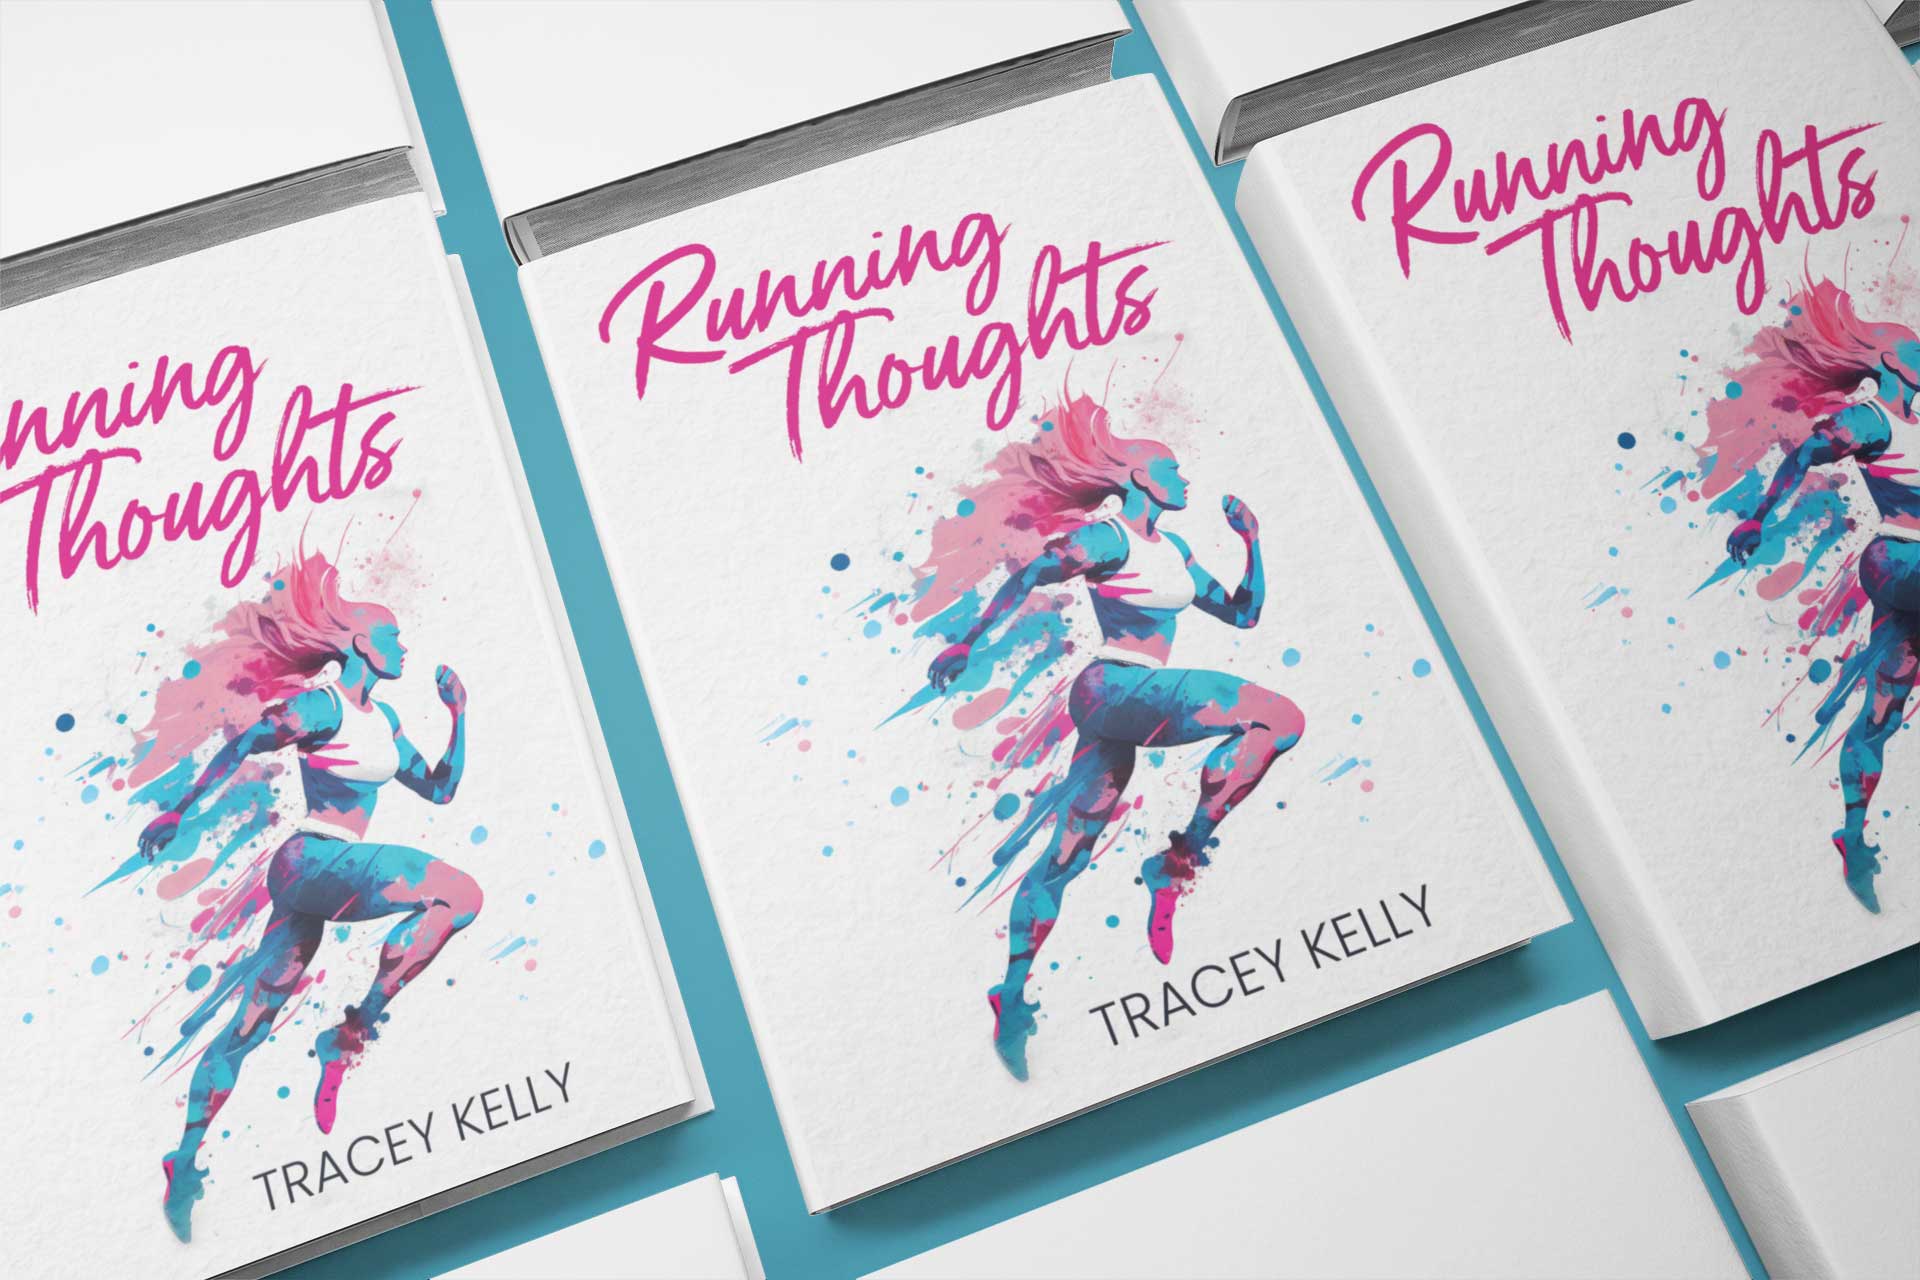 Running-Thoughts by Tracey Kelly, self-help